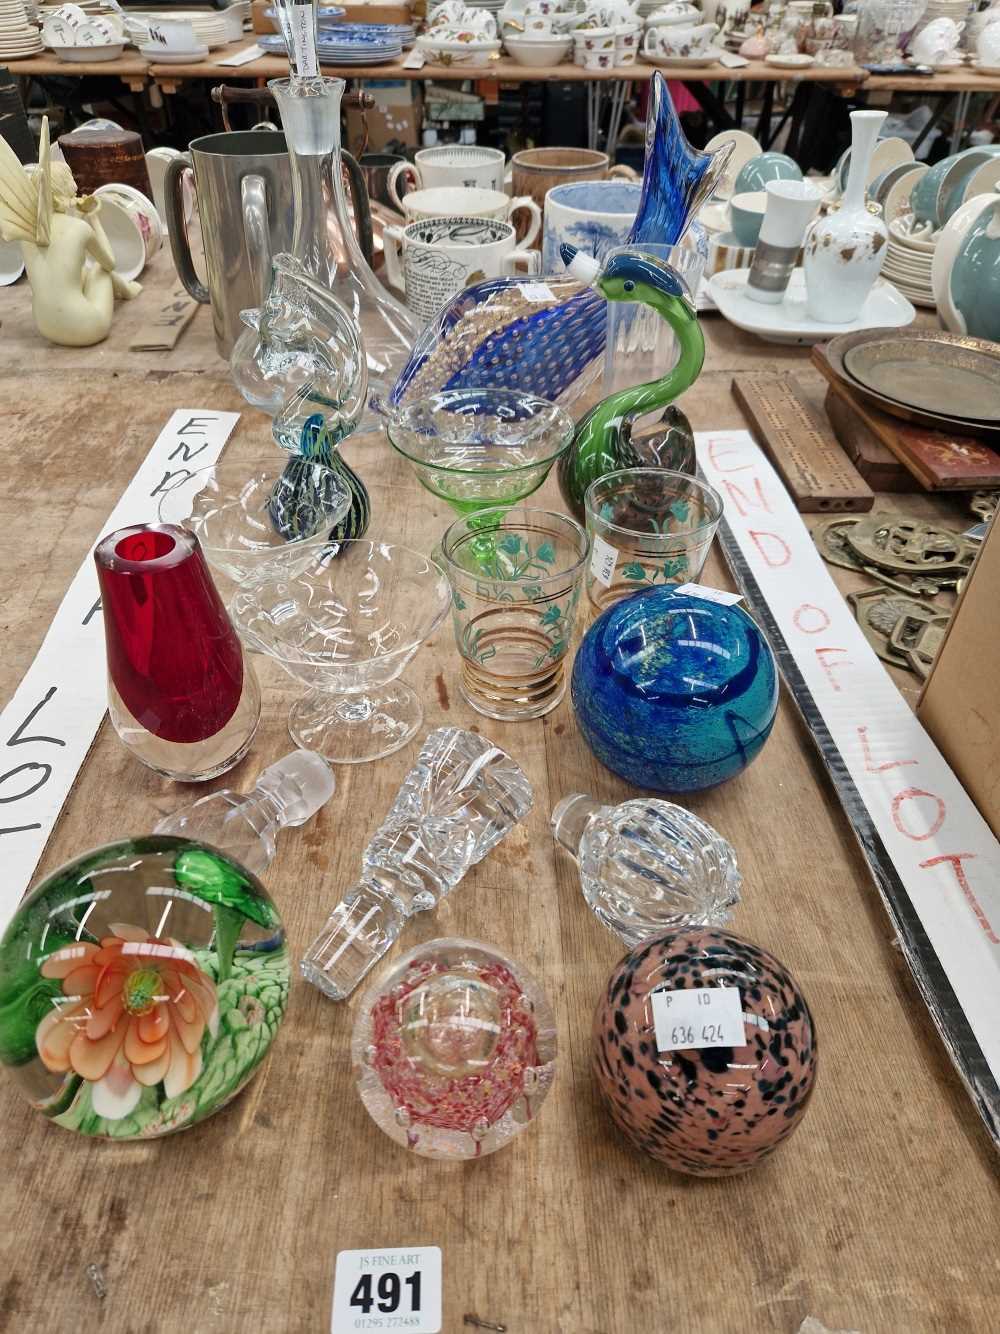 Glass paperweights, ornaments, vases and a decanter.